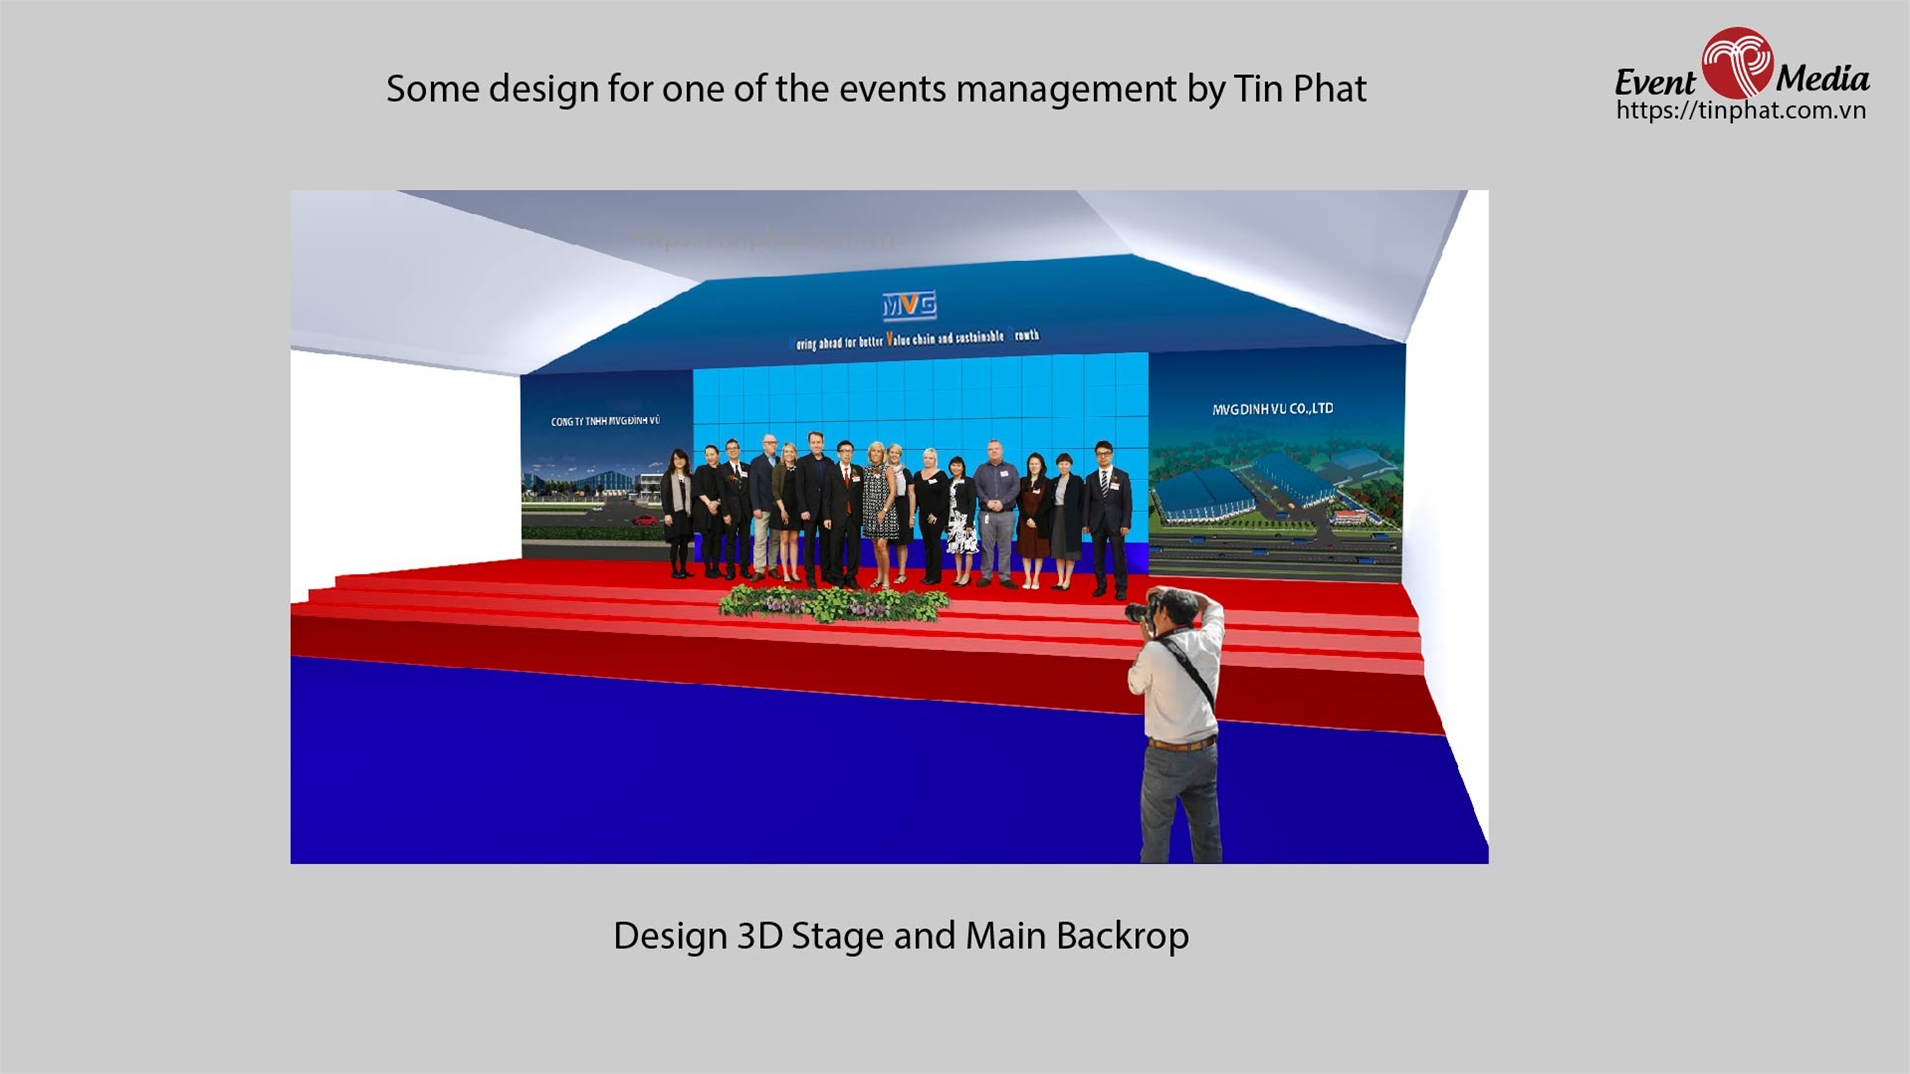 Design 3D stage and main backrop of Event